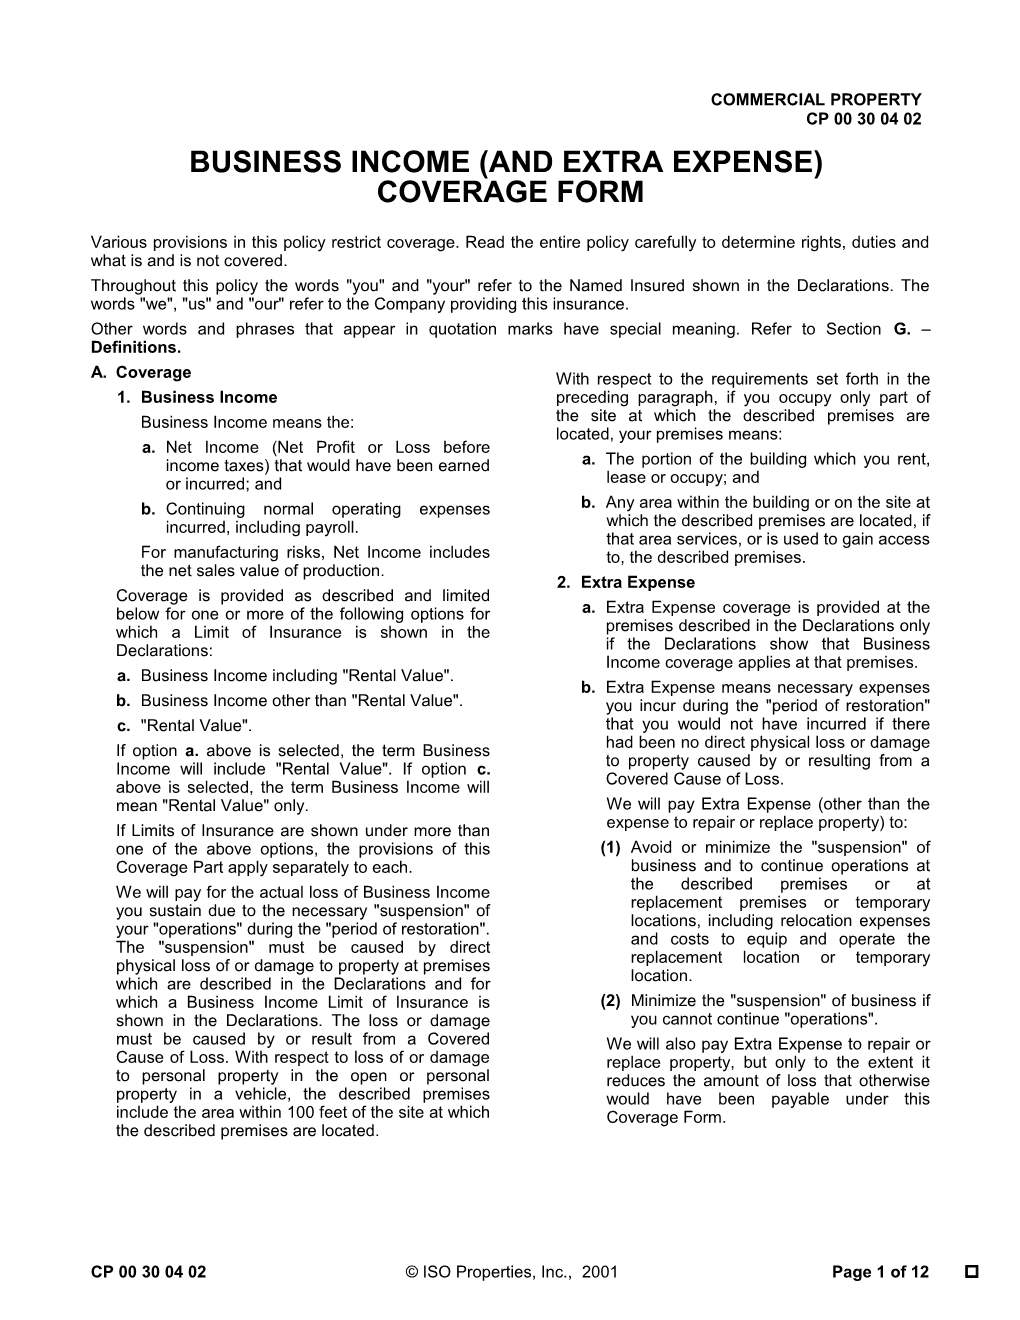 Business Income (And Extra Expense) Coverage Form